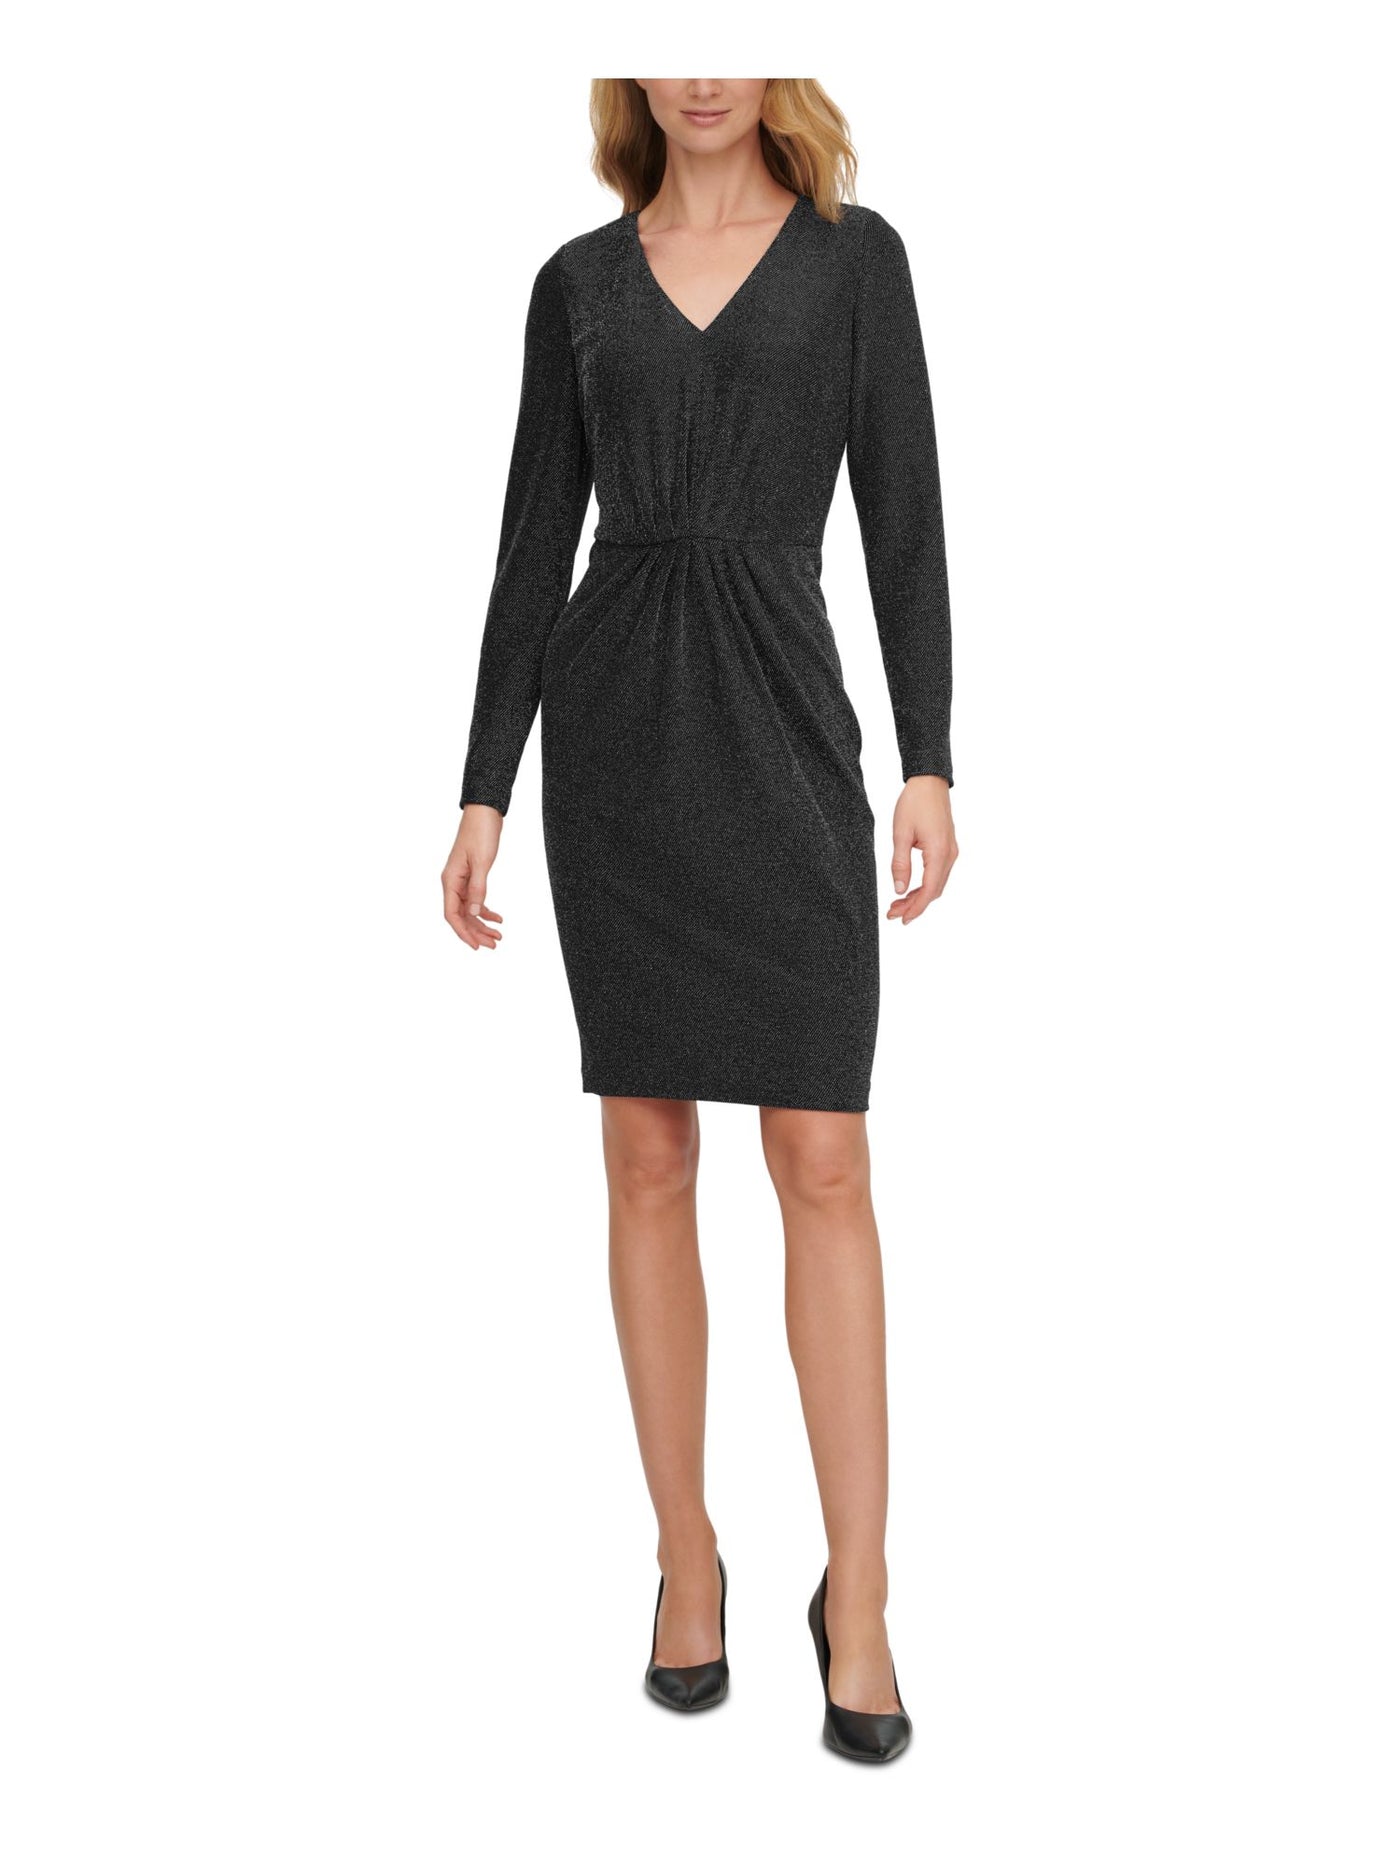 CALVIN KLEIN Womens Black Stretch Ruched Zippered Long Sleeve V Neck Above The Knee Party Sheath Dress 14